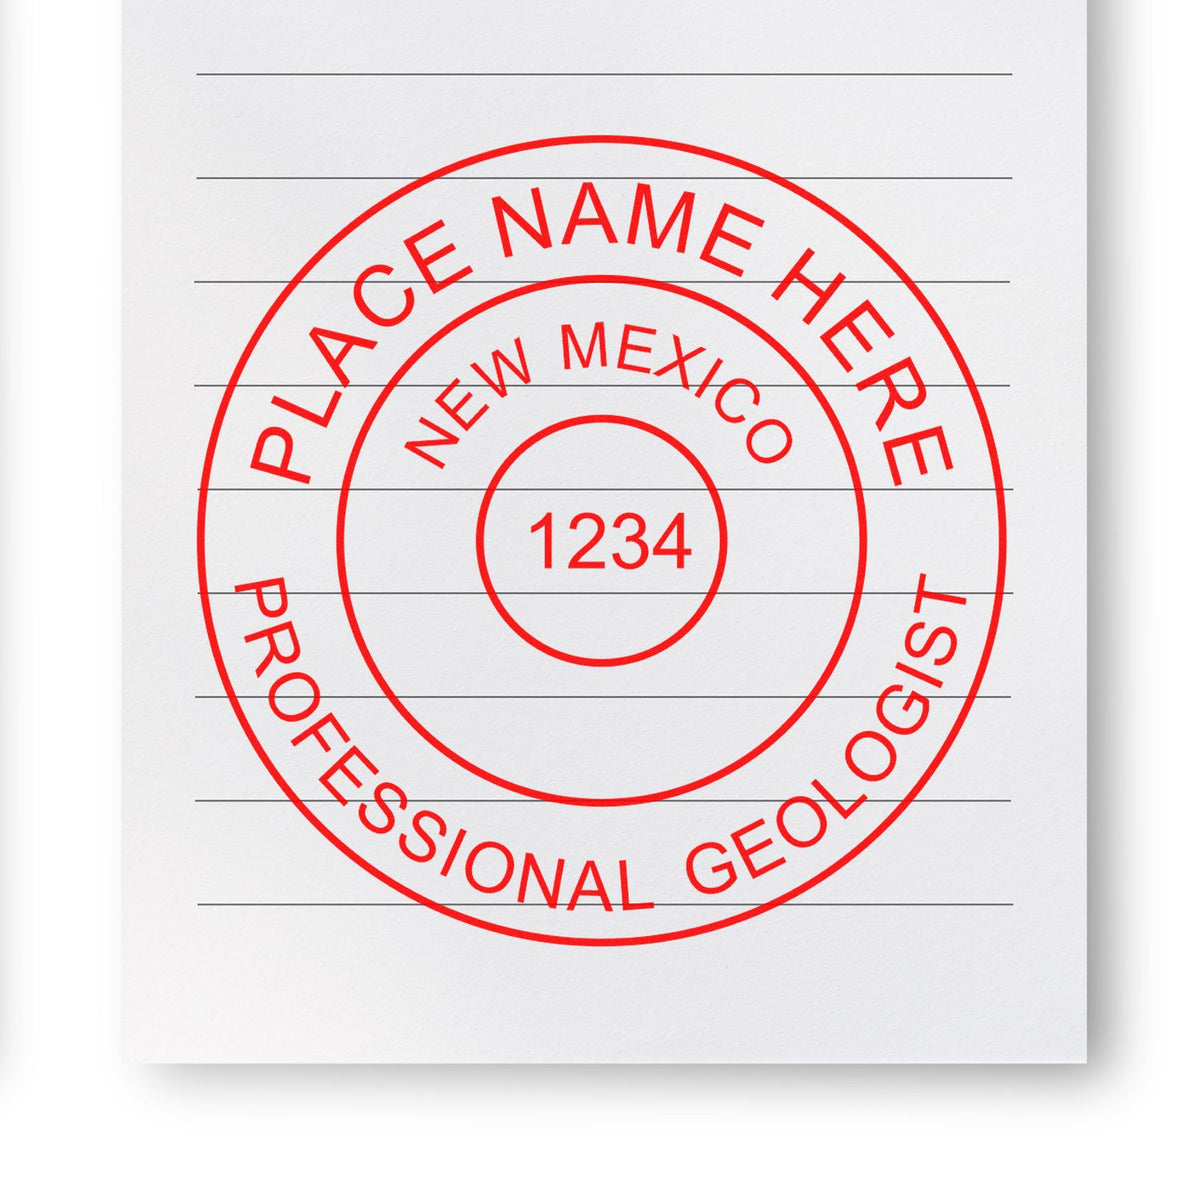 The Premium MaxLight Pre-Inked New Mexico Geology Stamp stamp impression comes to life with a crisp, detailed image stamped on paper - showcasing true professional quality.